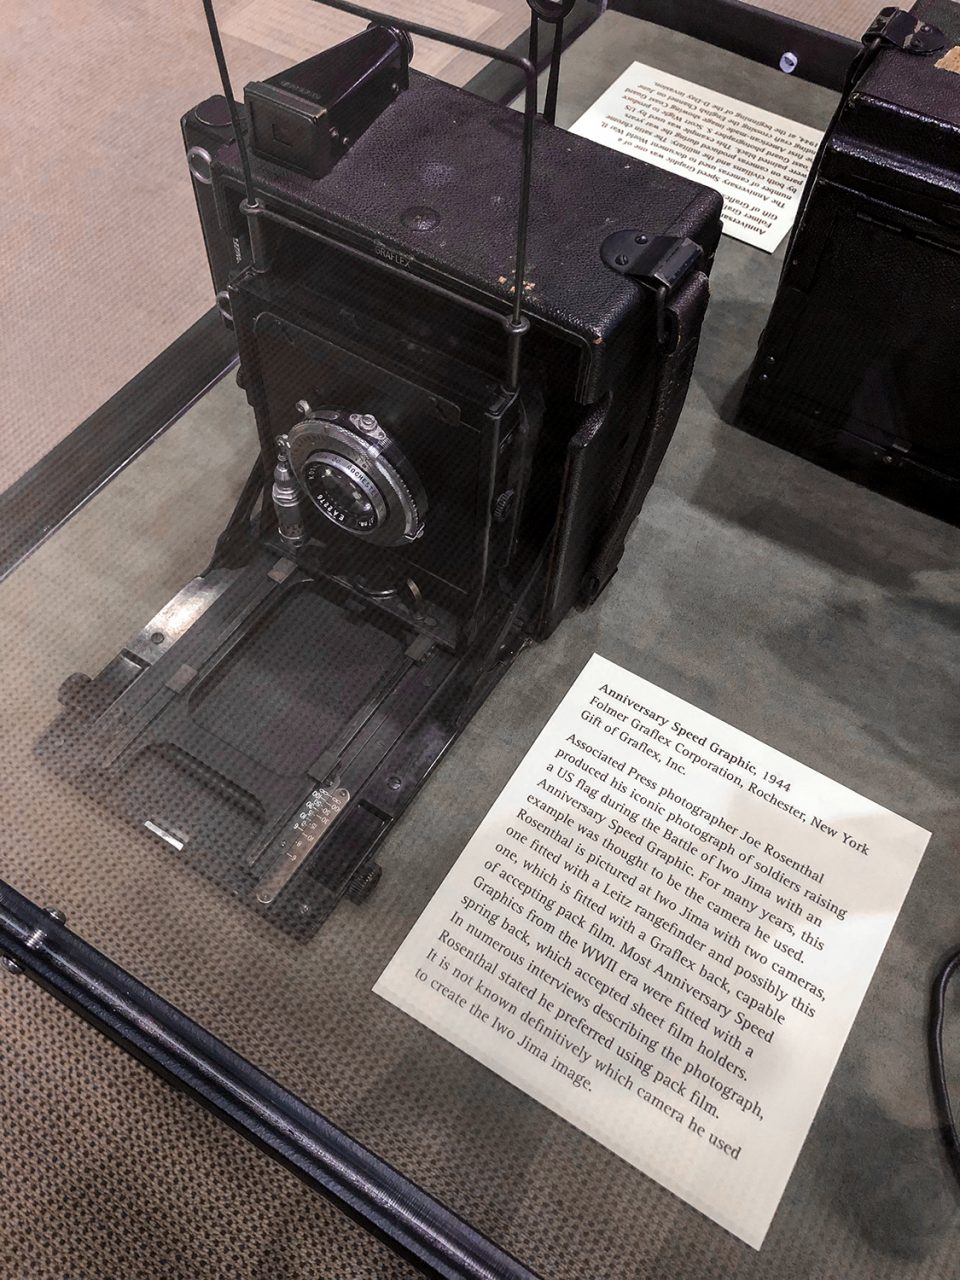 A picture of (perhaps) the Graflex Speed Graphic camera used by photojournalist Joe Rosenthal to shoot the U.S. Marines raising the flag over Iwo Jima.